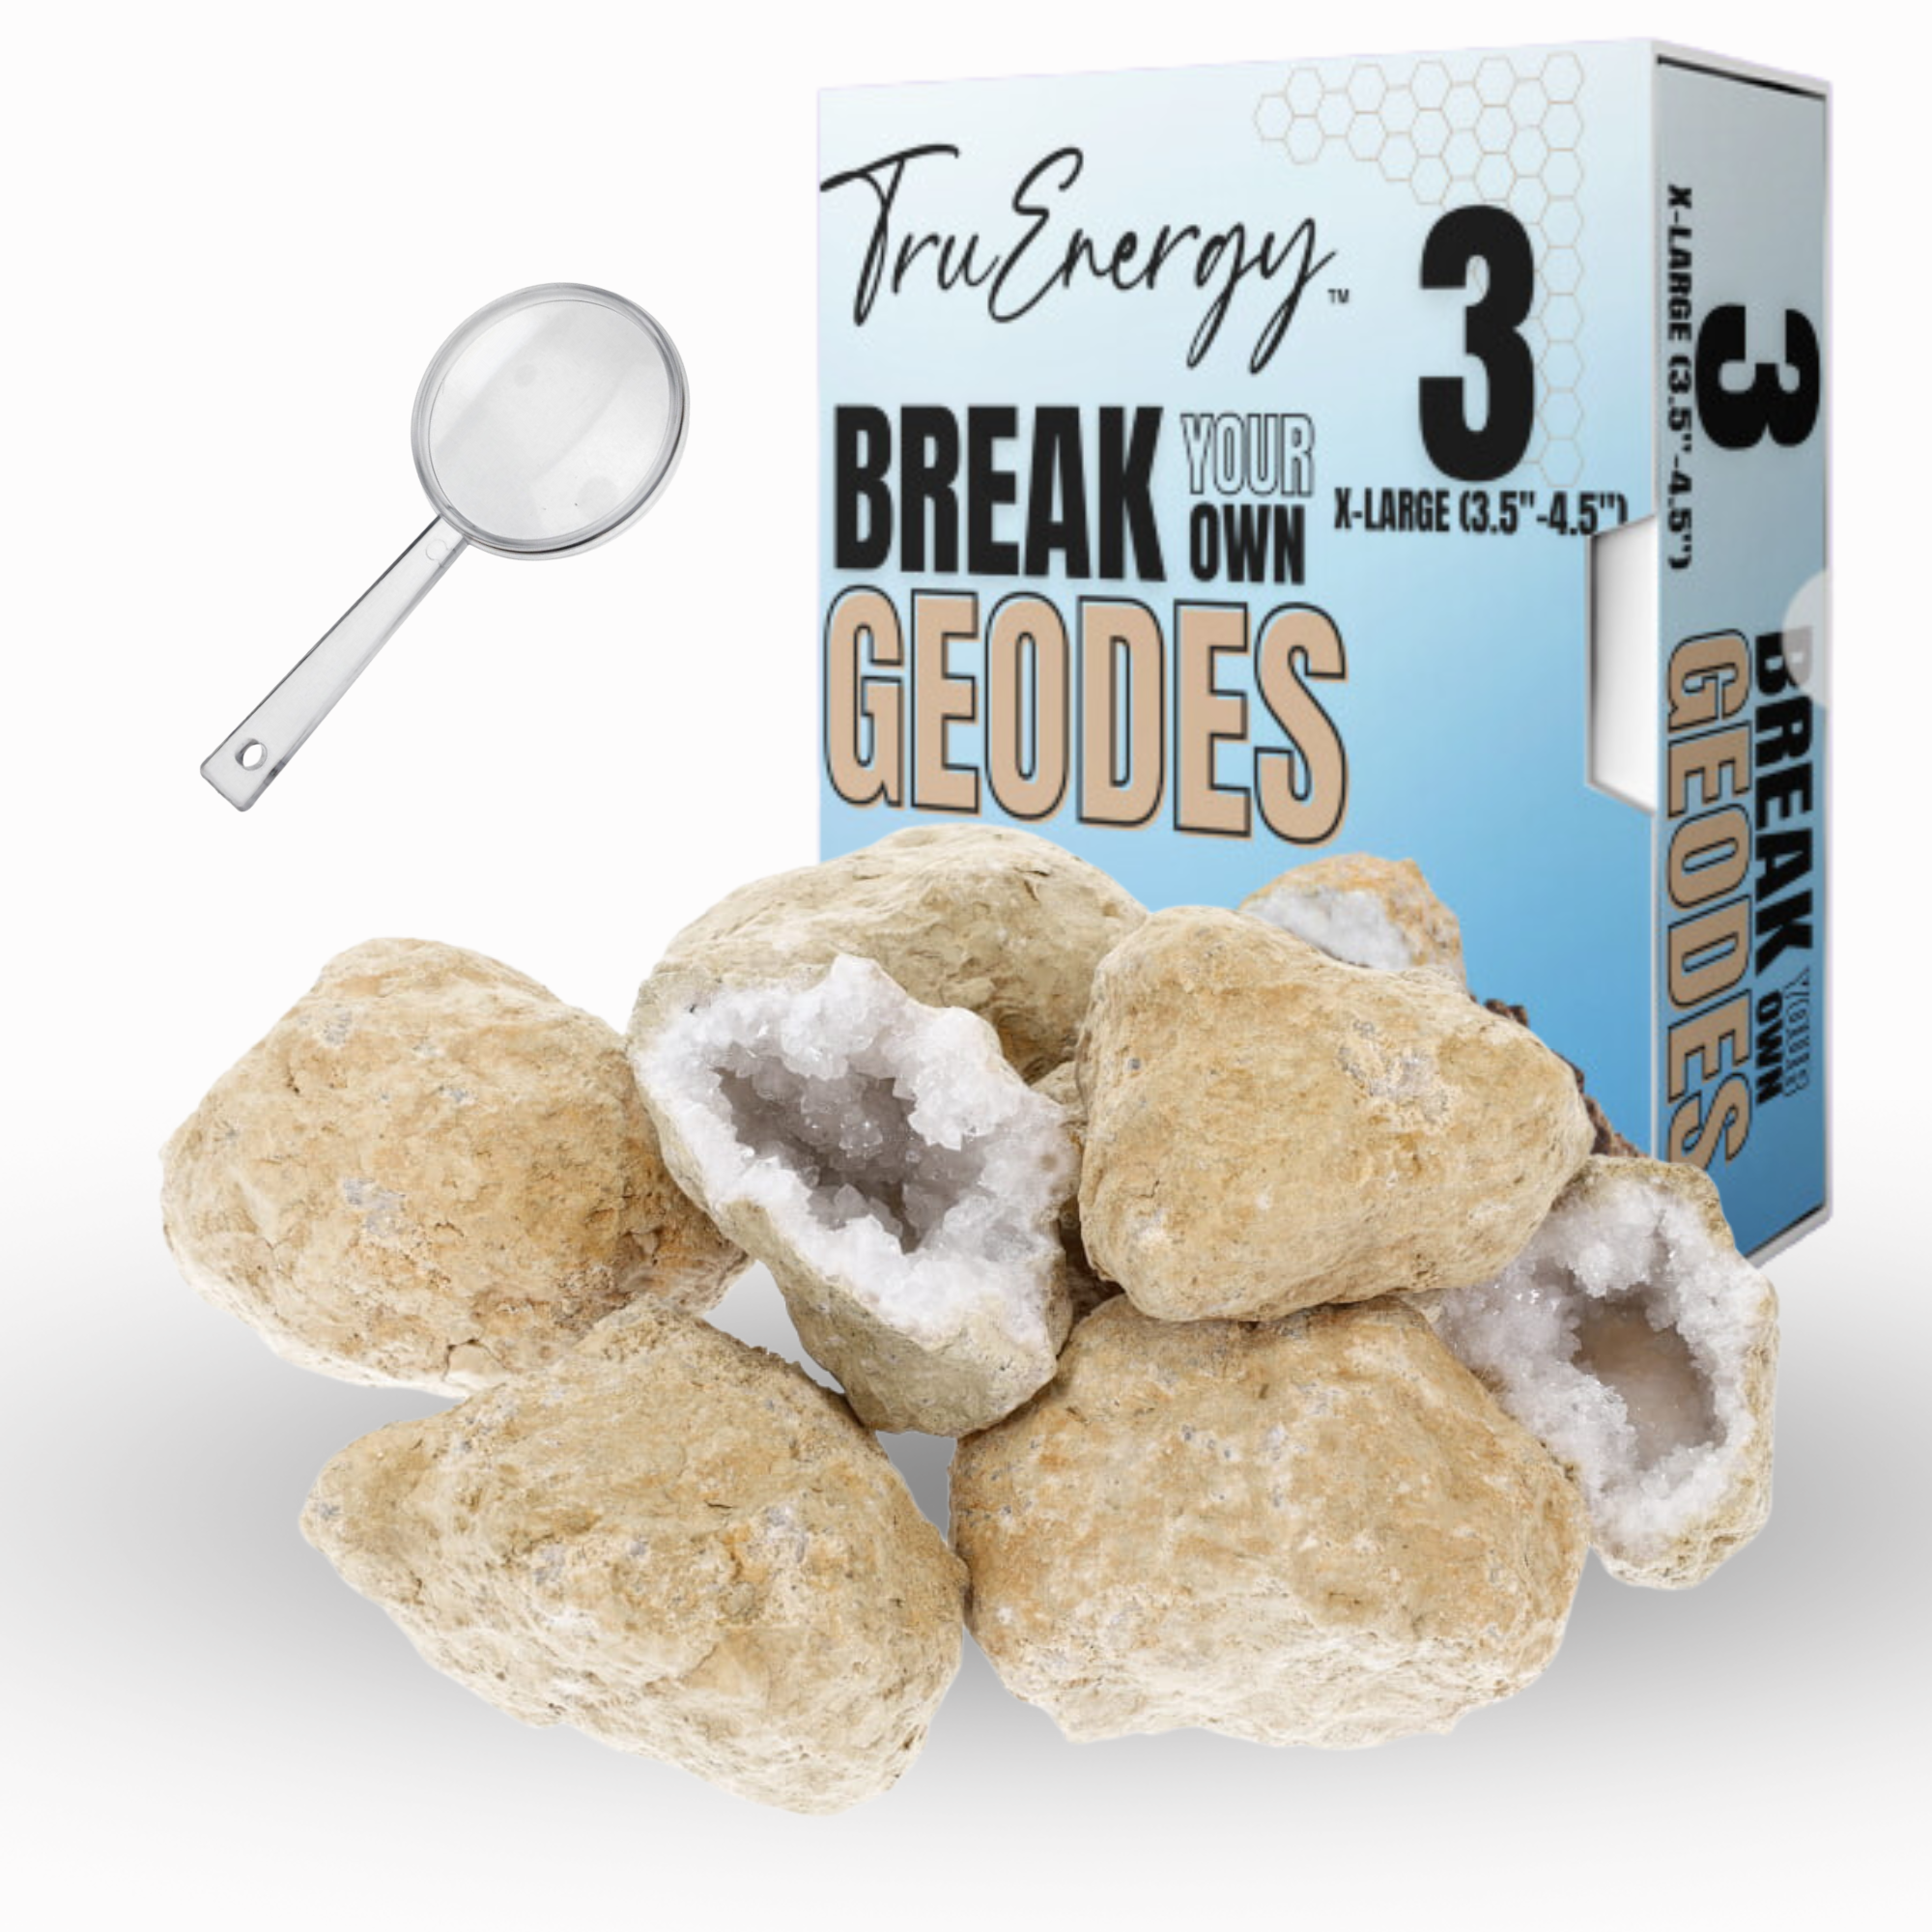 TruEnergy Break Your Own Geodes Kit with Crystals - 4LBS  ( 1.75-5")